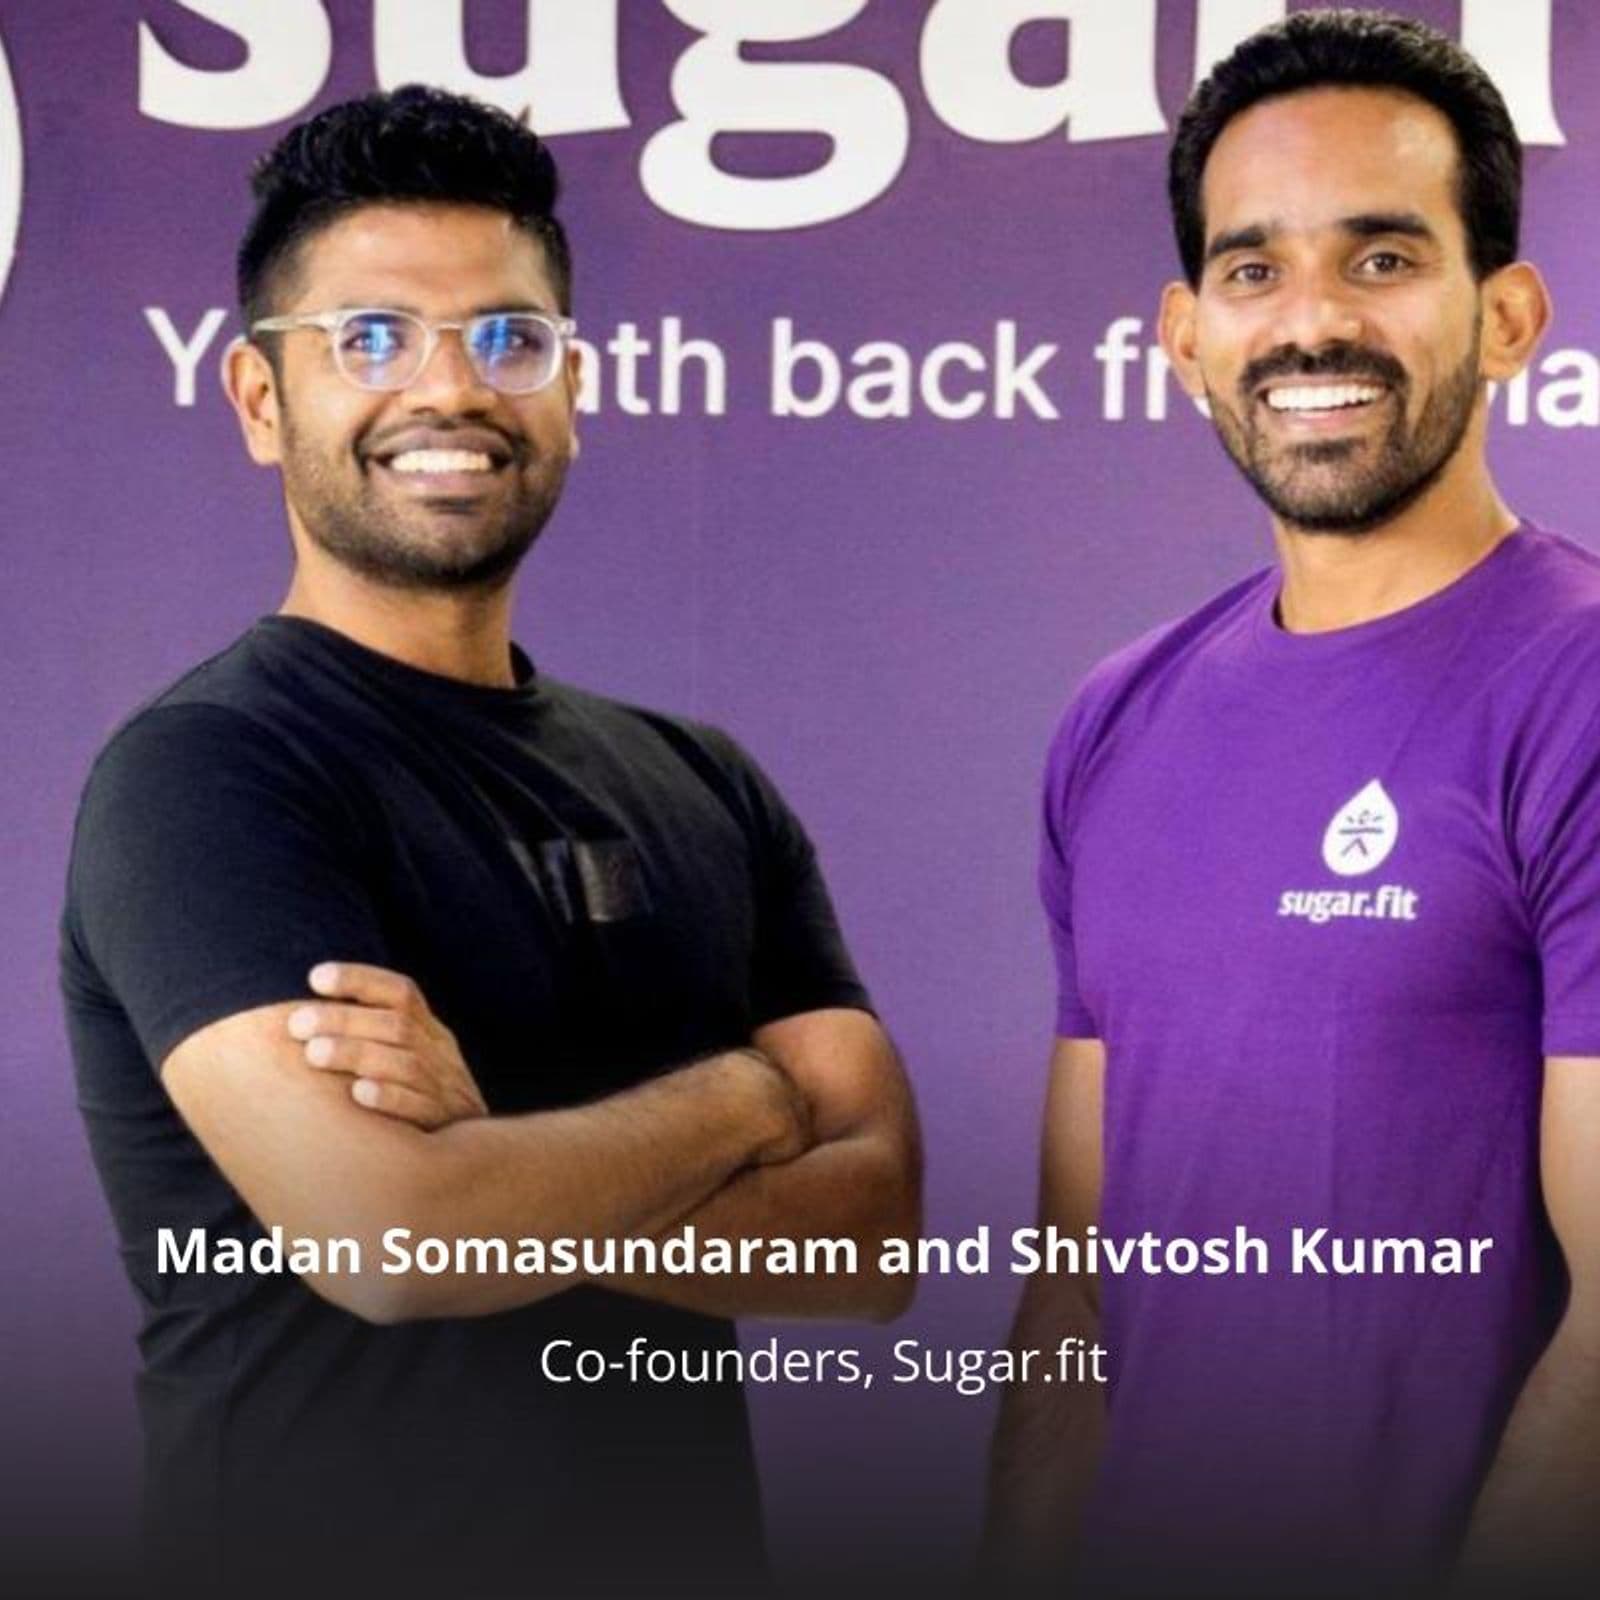 Sugar.fit secures additional $5M in Series A funding led by B Capital